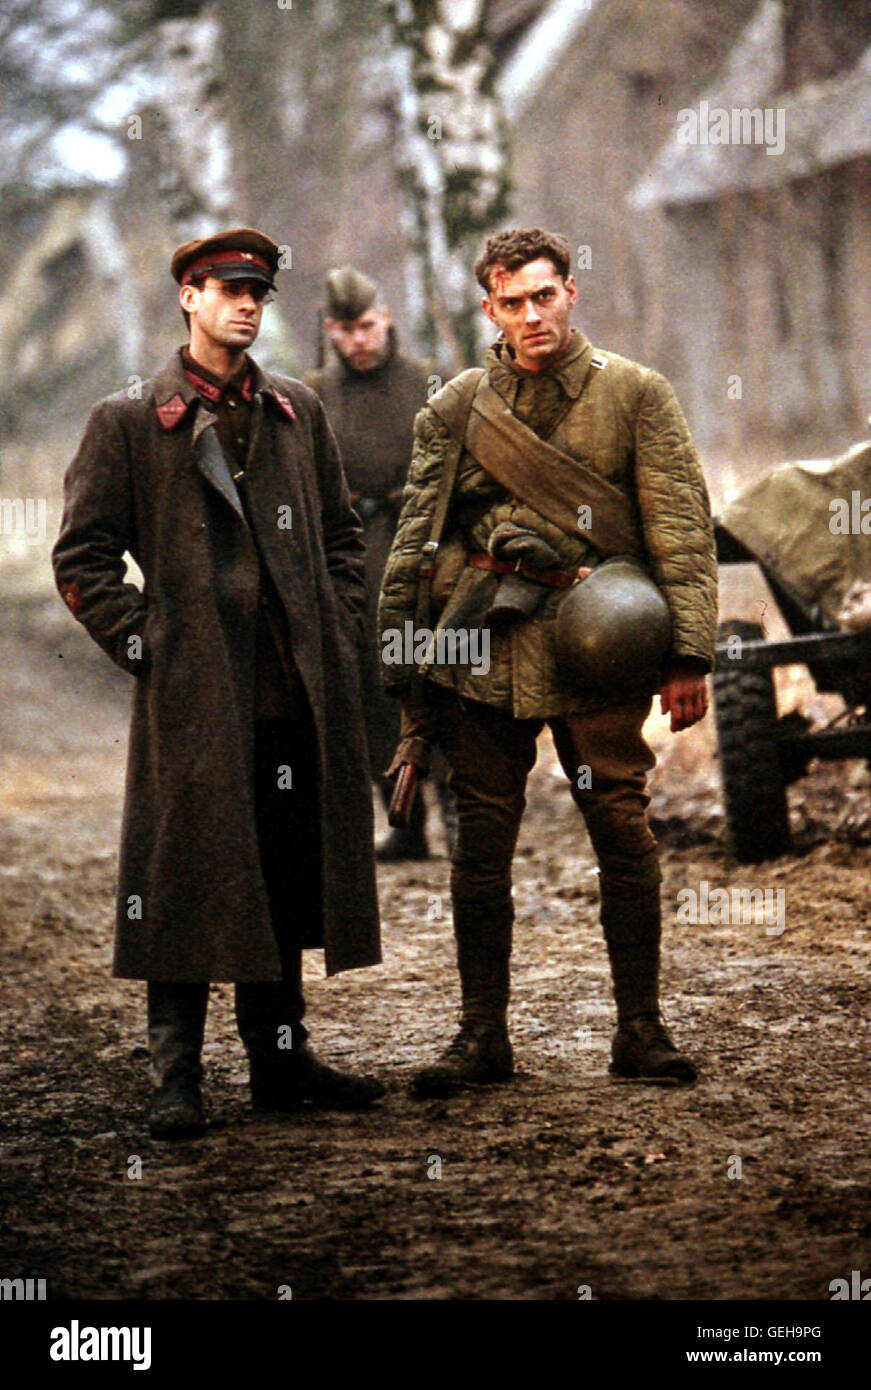 Danilov (Joseph Fiennes), Vassili (Jude Law) *** Local Caption *** 2000,  Duell - Enemy At The Gates, Duell - Enemy At The Gates Stock Photo - Alamy